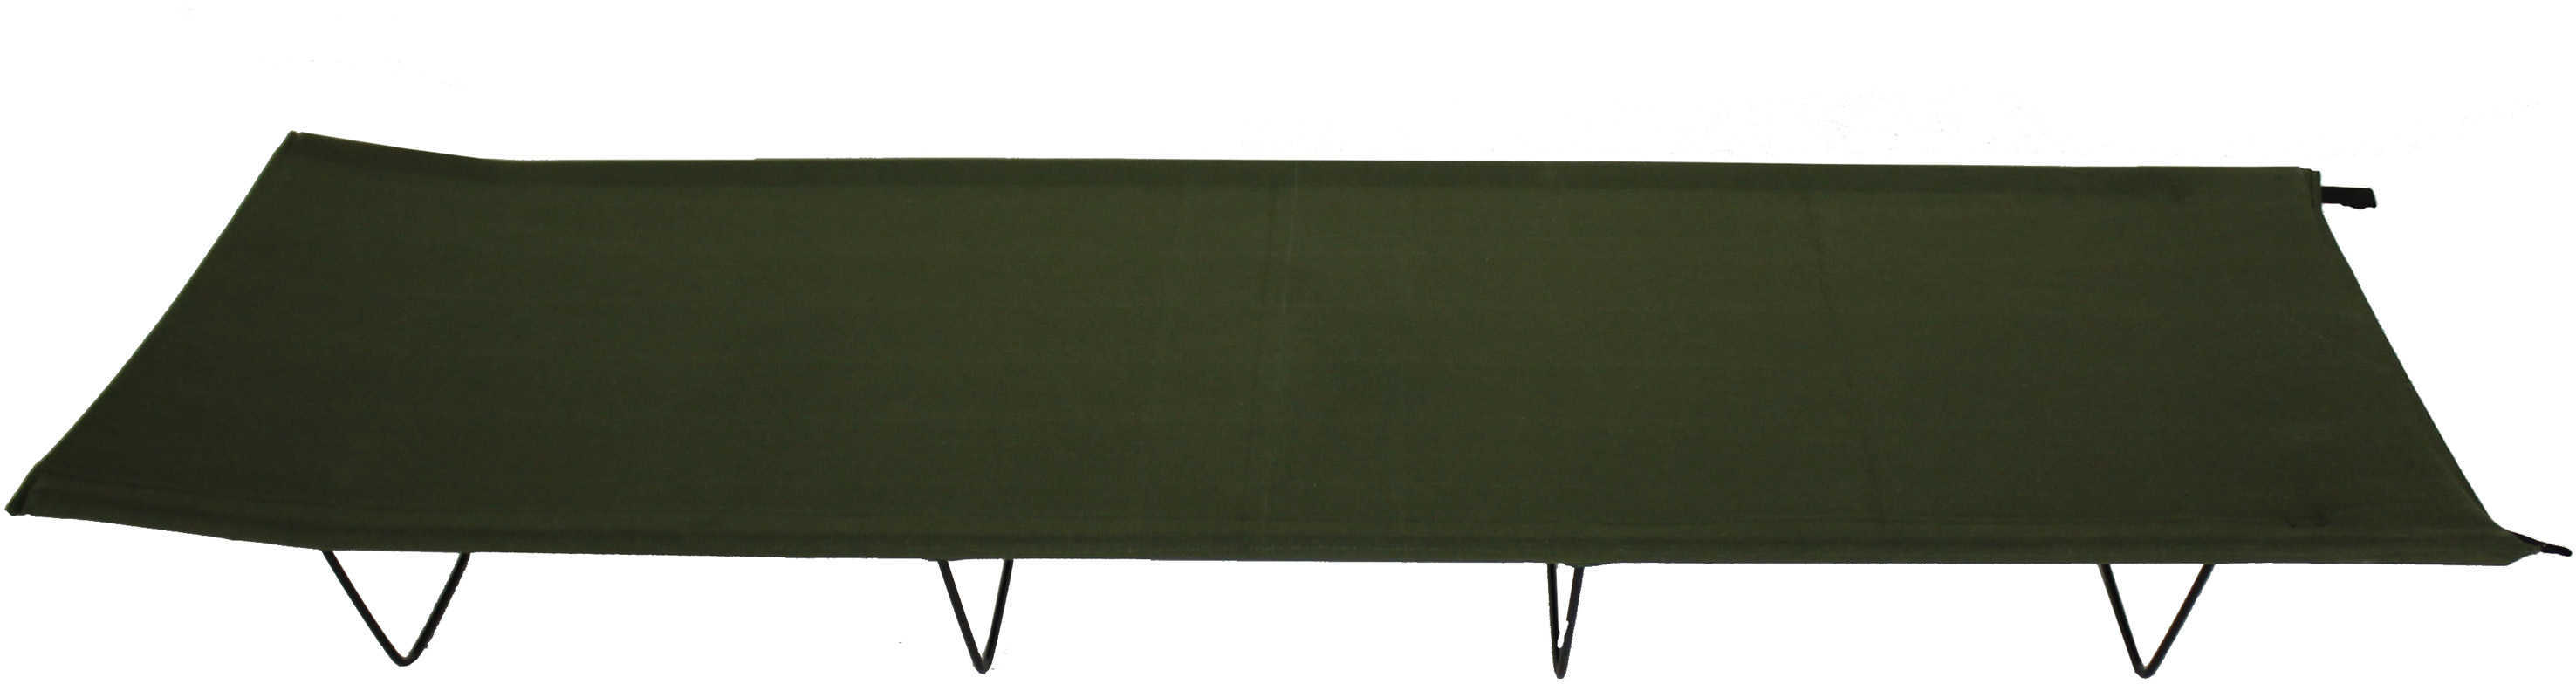 Texsport 72 In. X 24 Folding Cot Collapsible Steel Camp